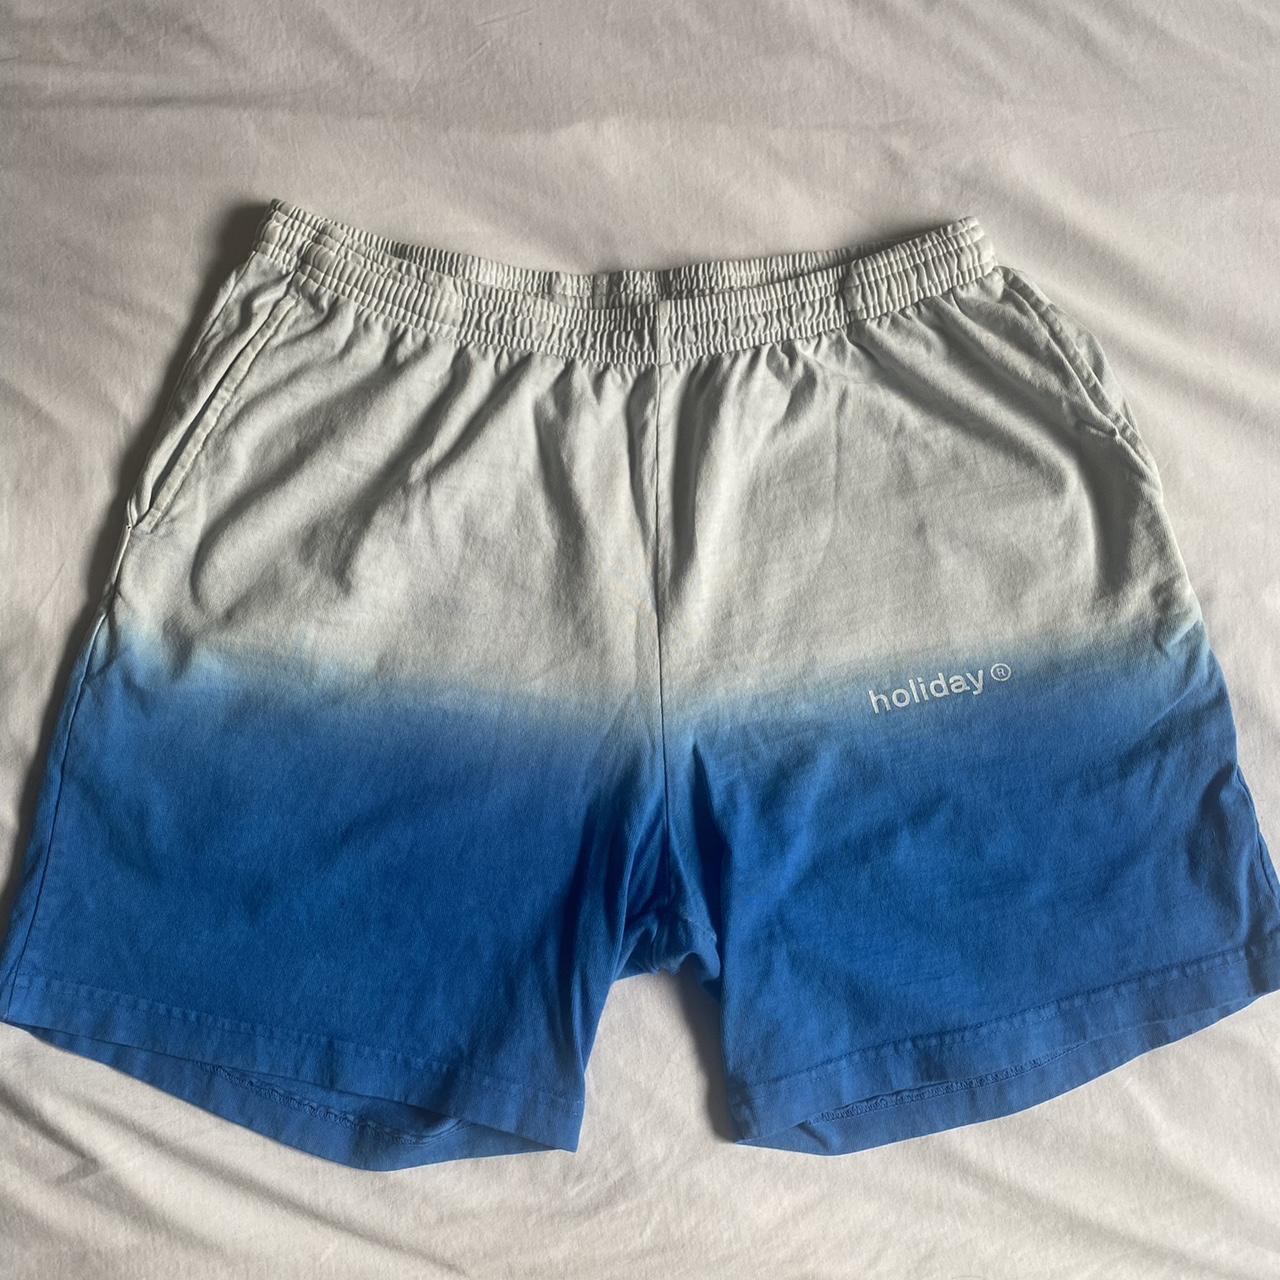 Holiday The Label Men's Blue and White Shorts